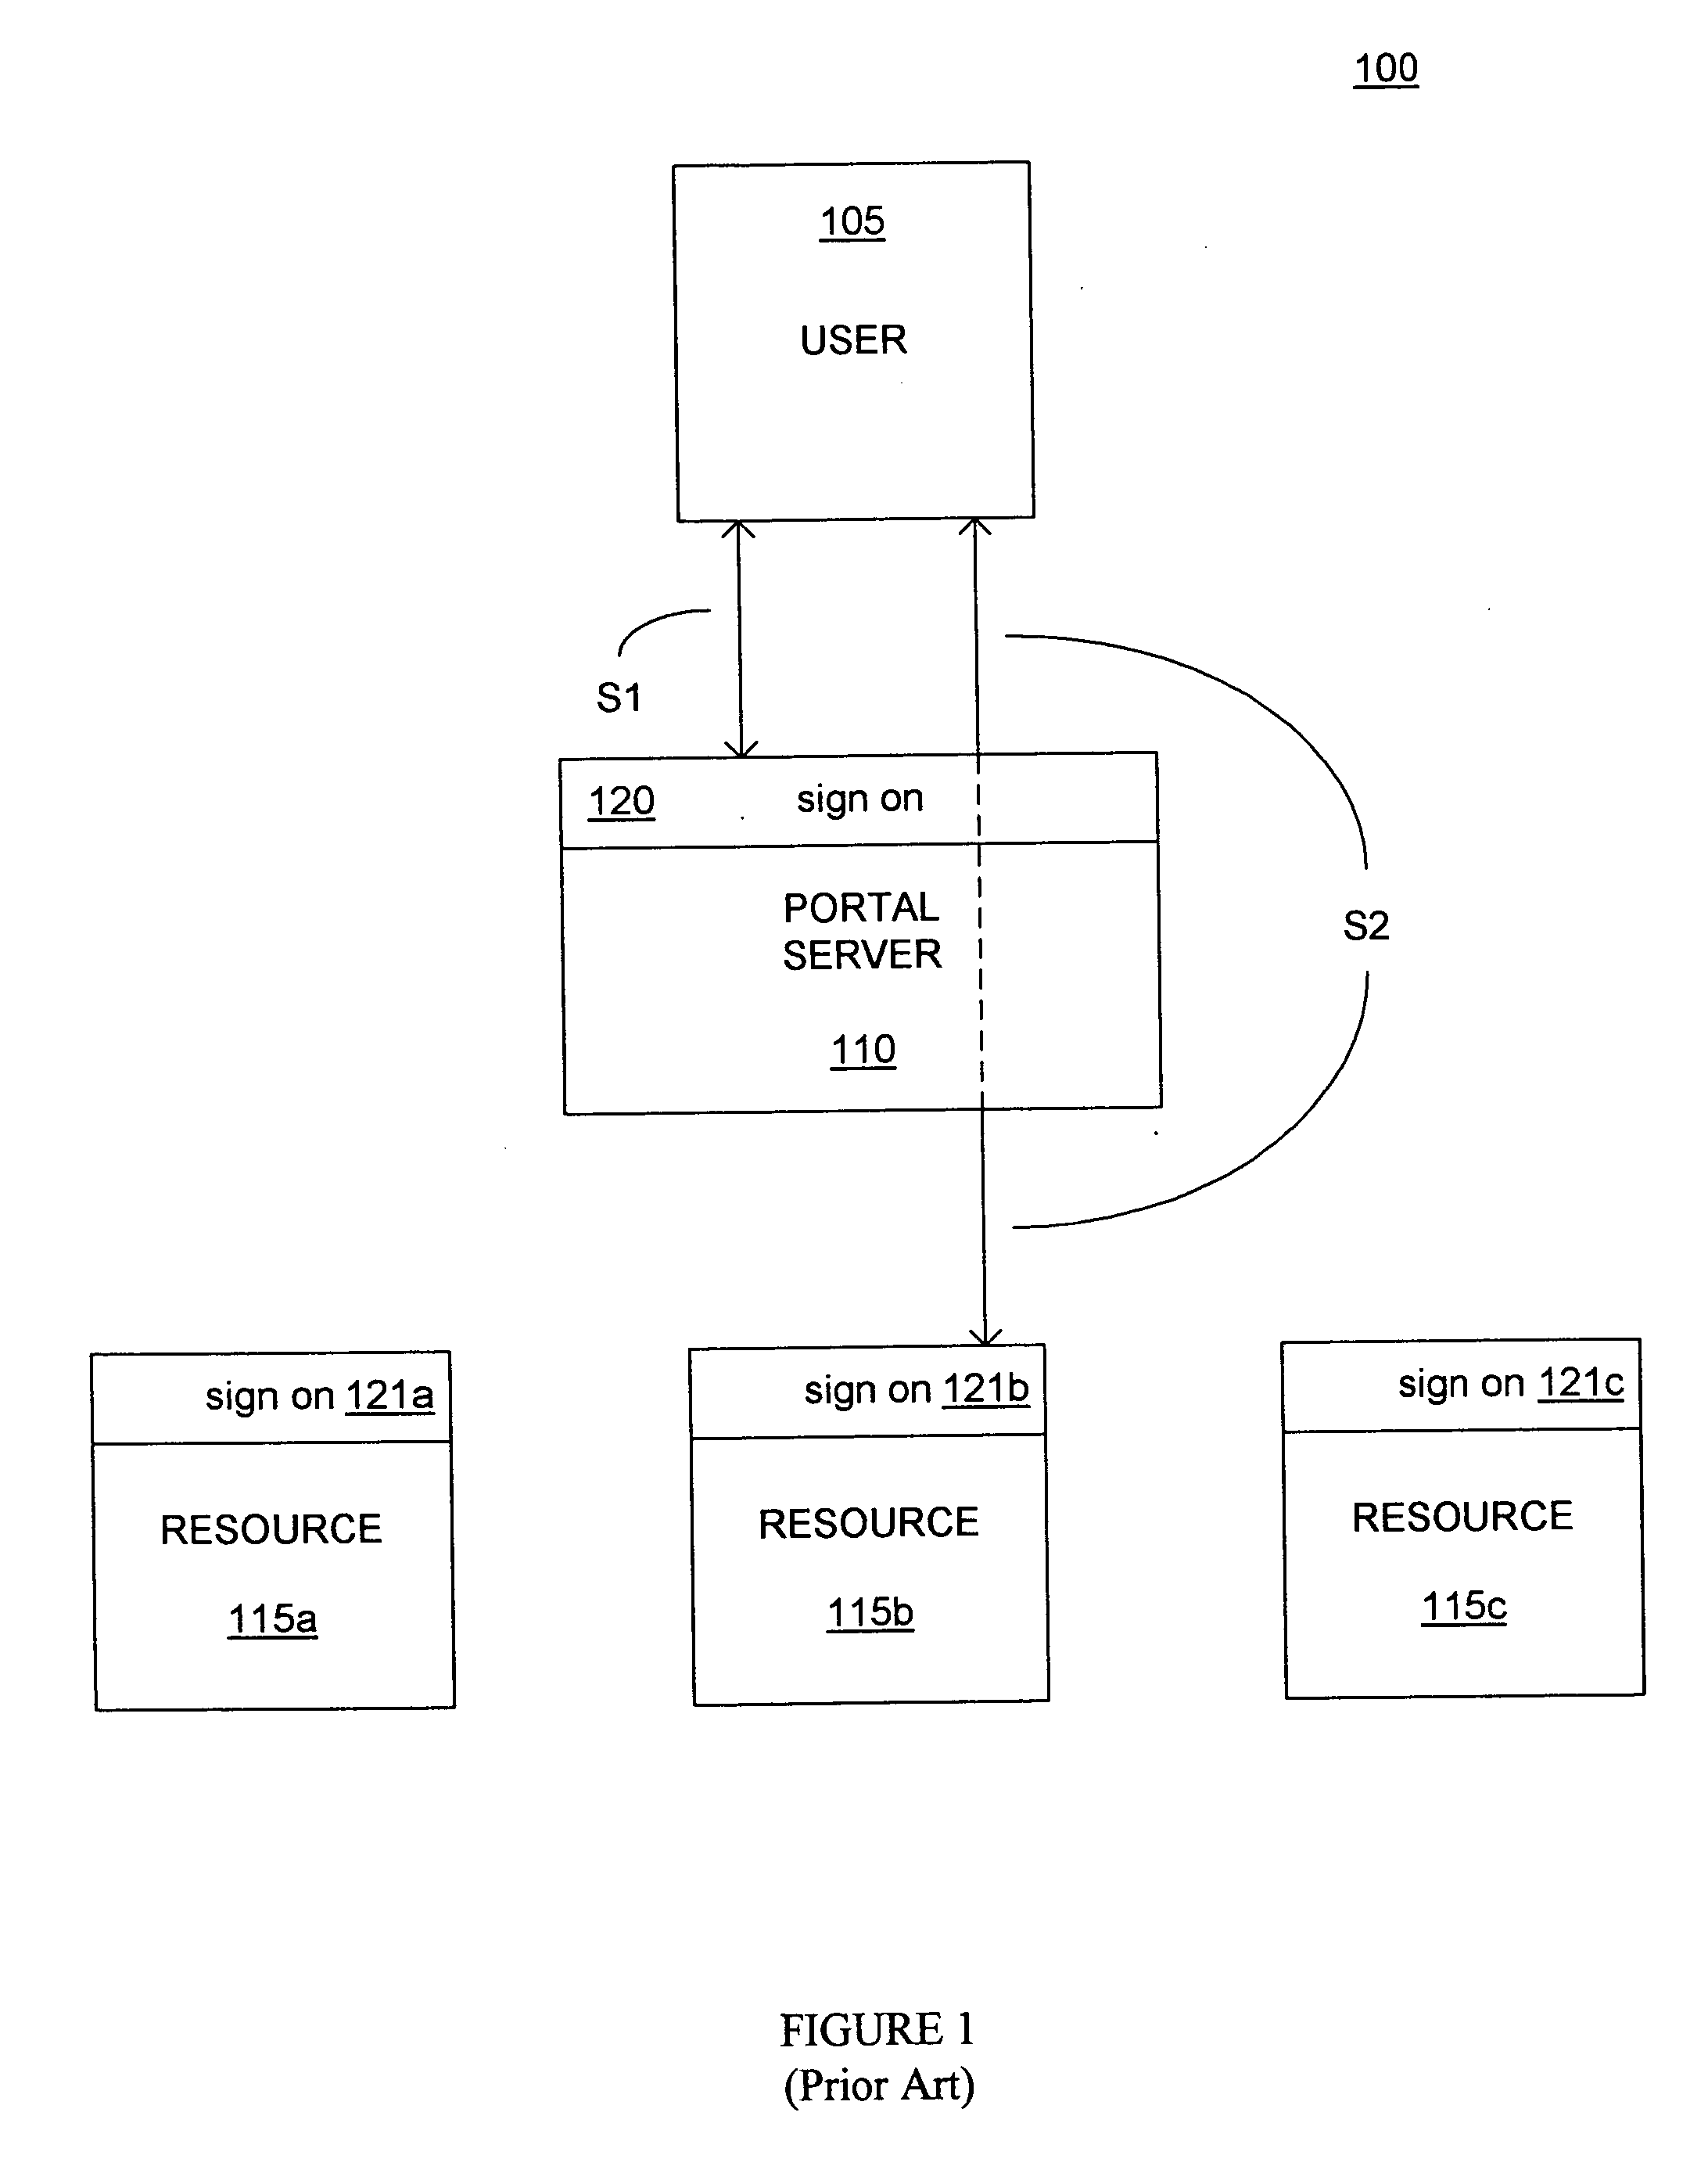 System and method for single-sign-on access to a resource via a portal server